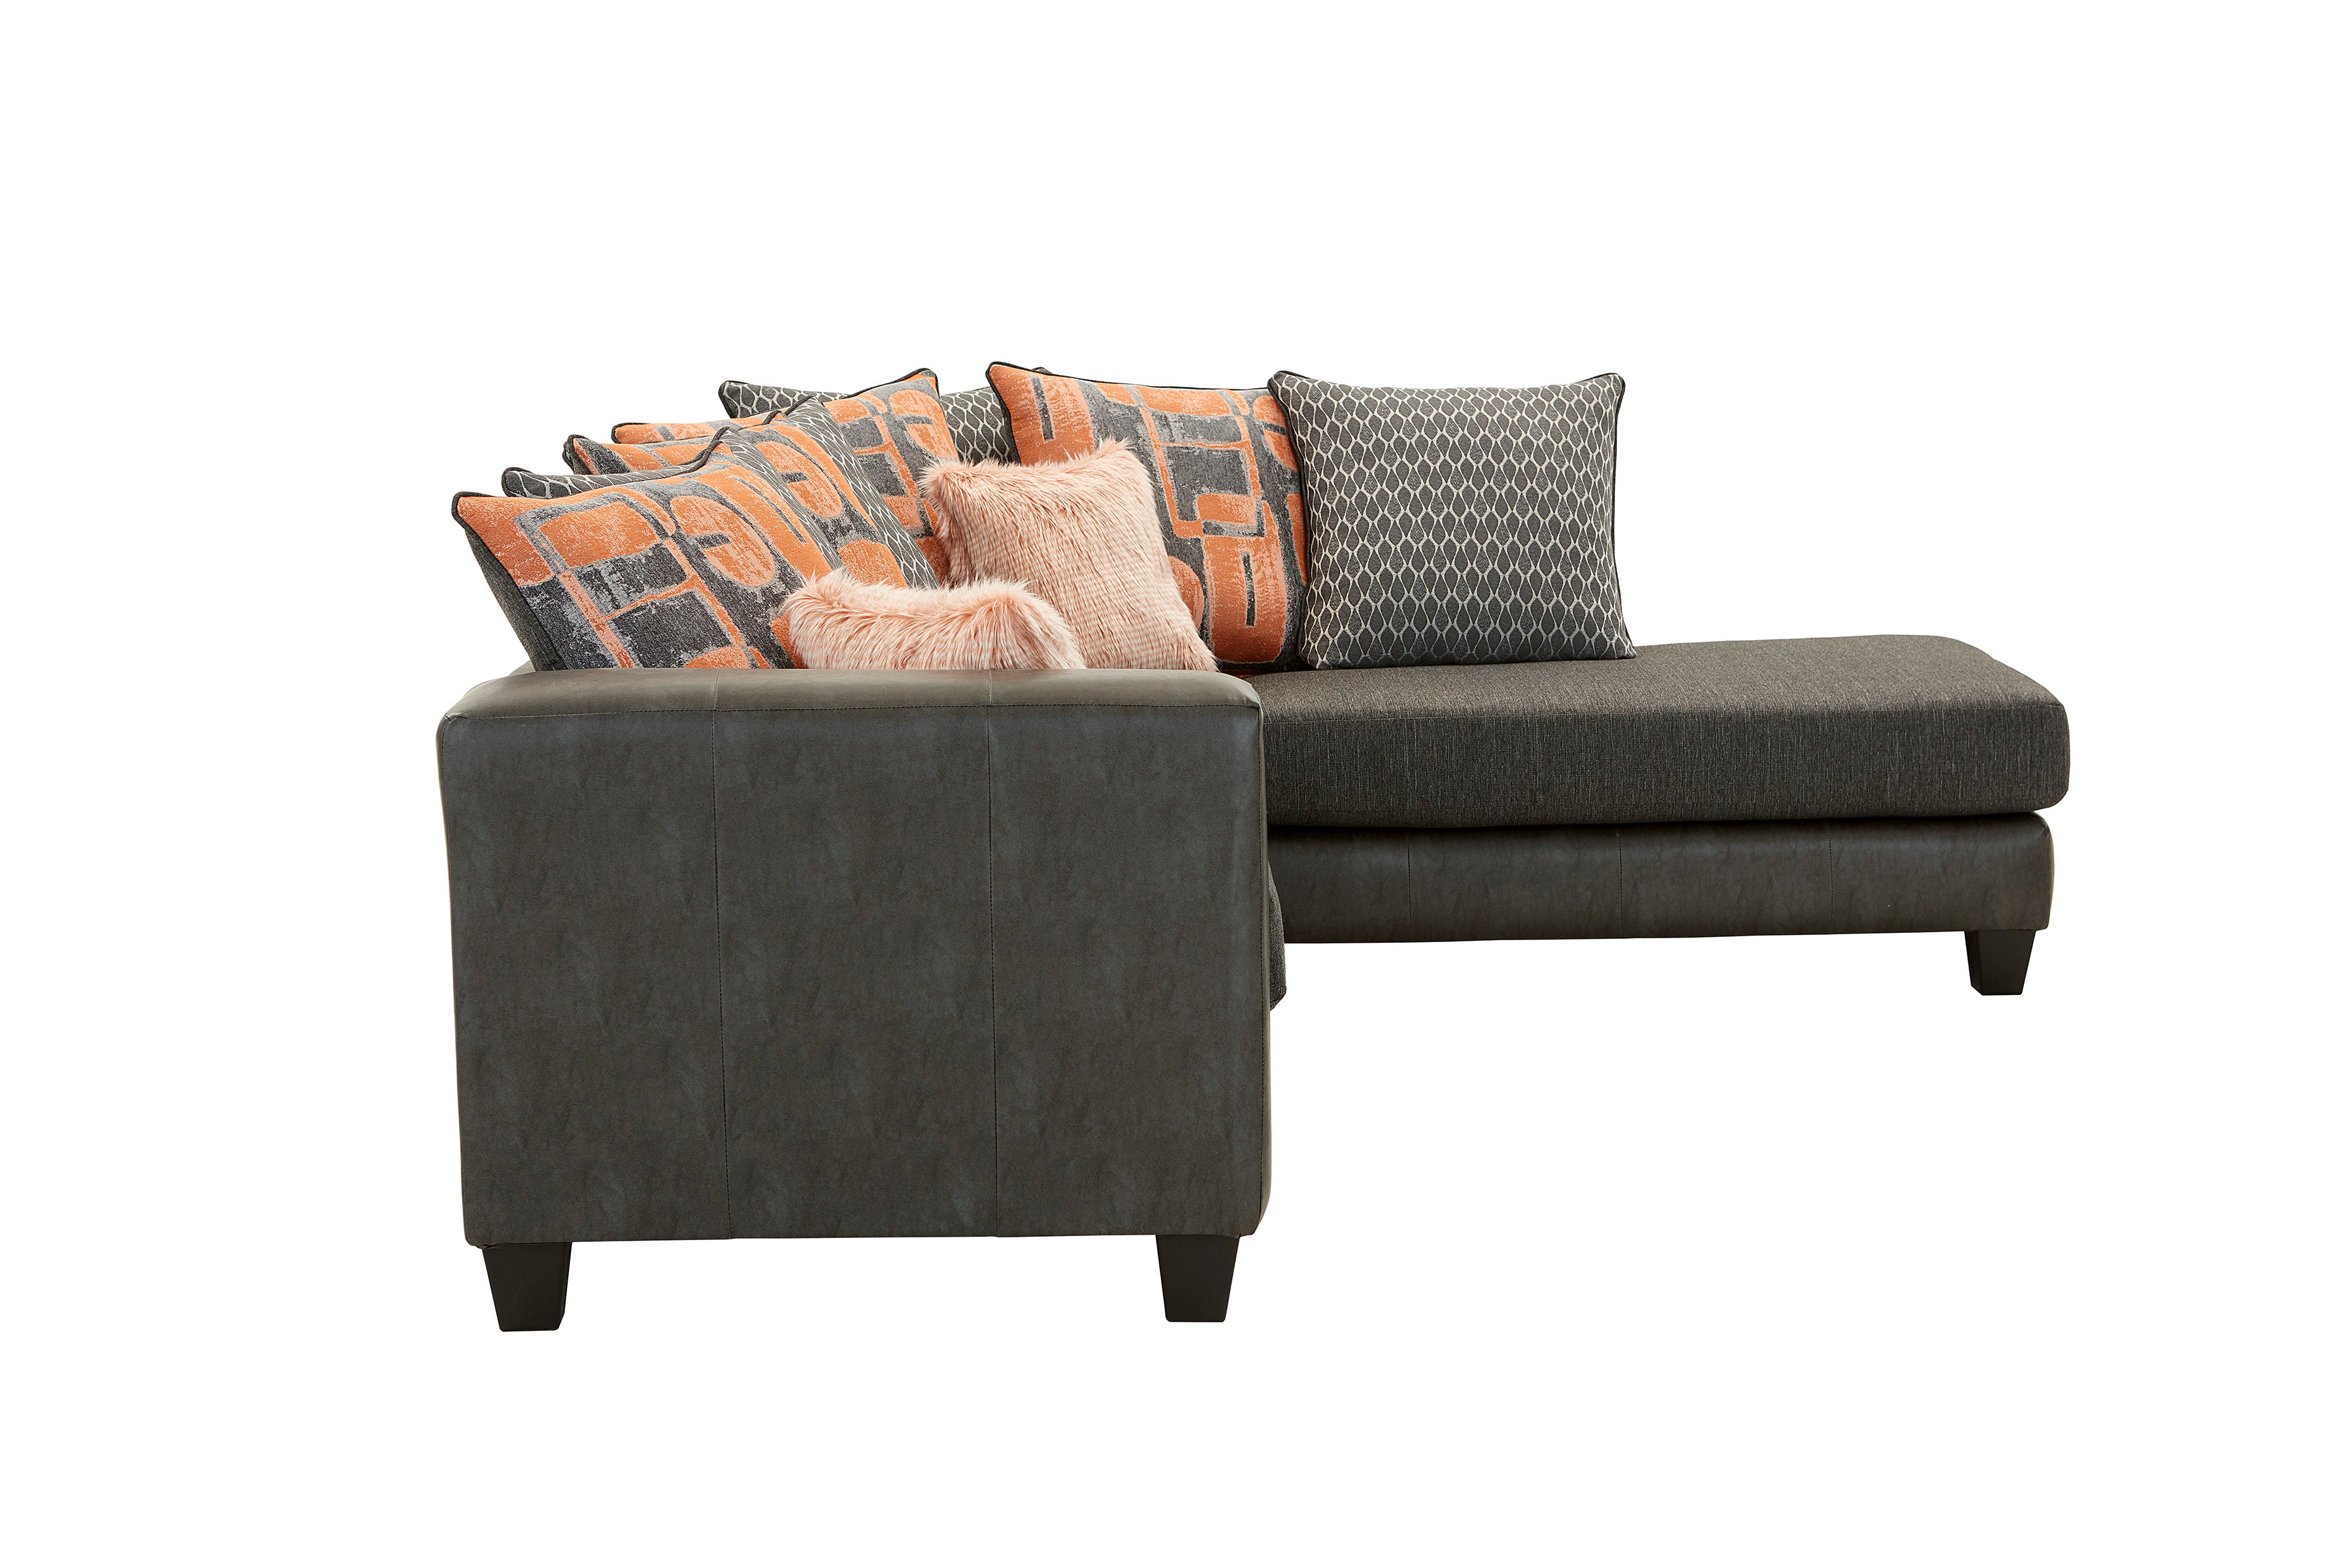 Everly 2-Piece Sectional